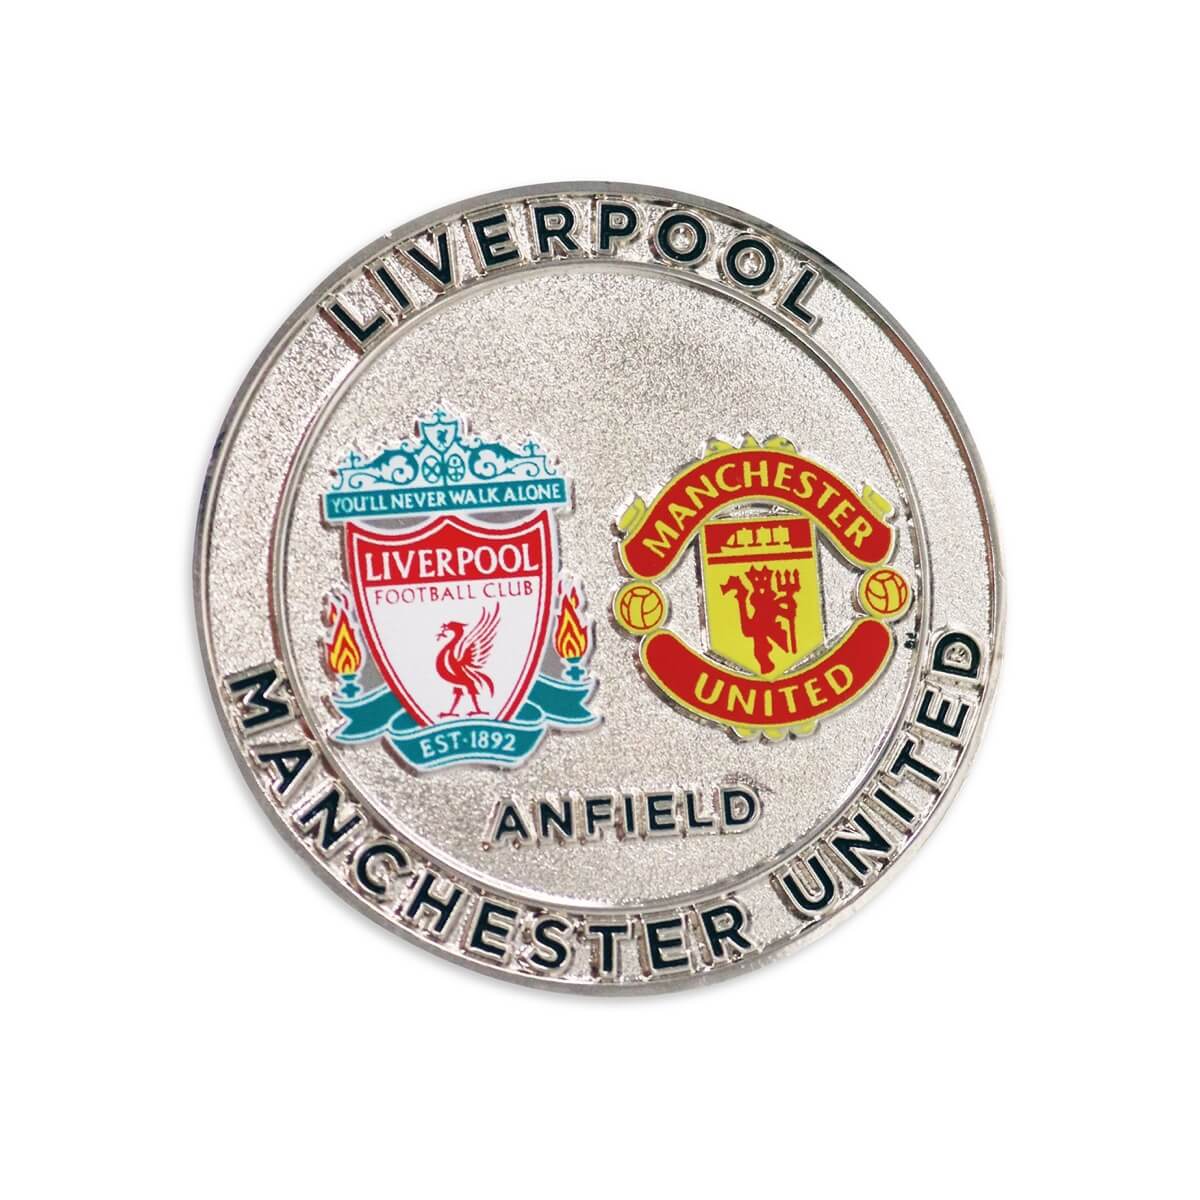 A Liverpool versus Manchester United pin badge